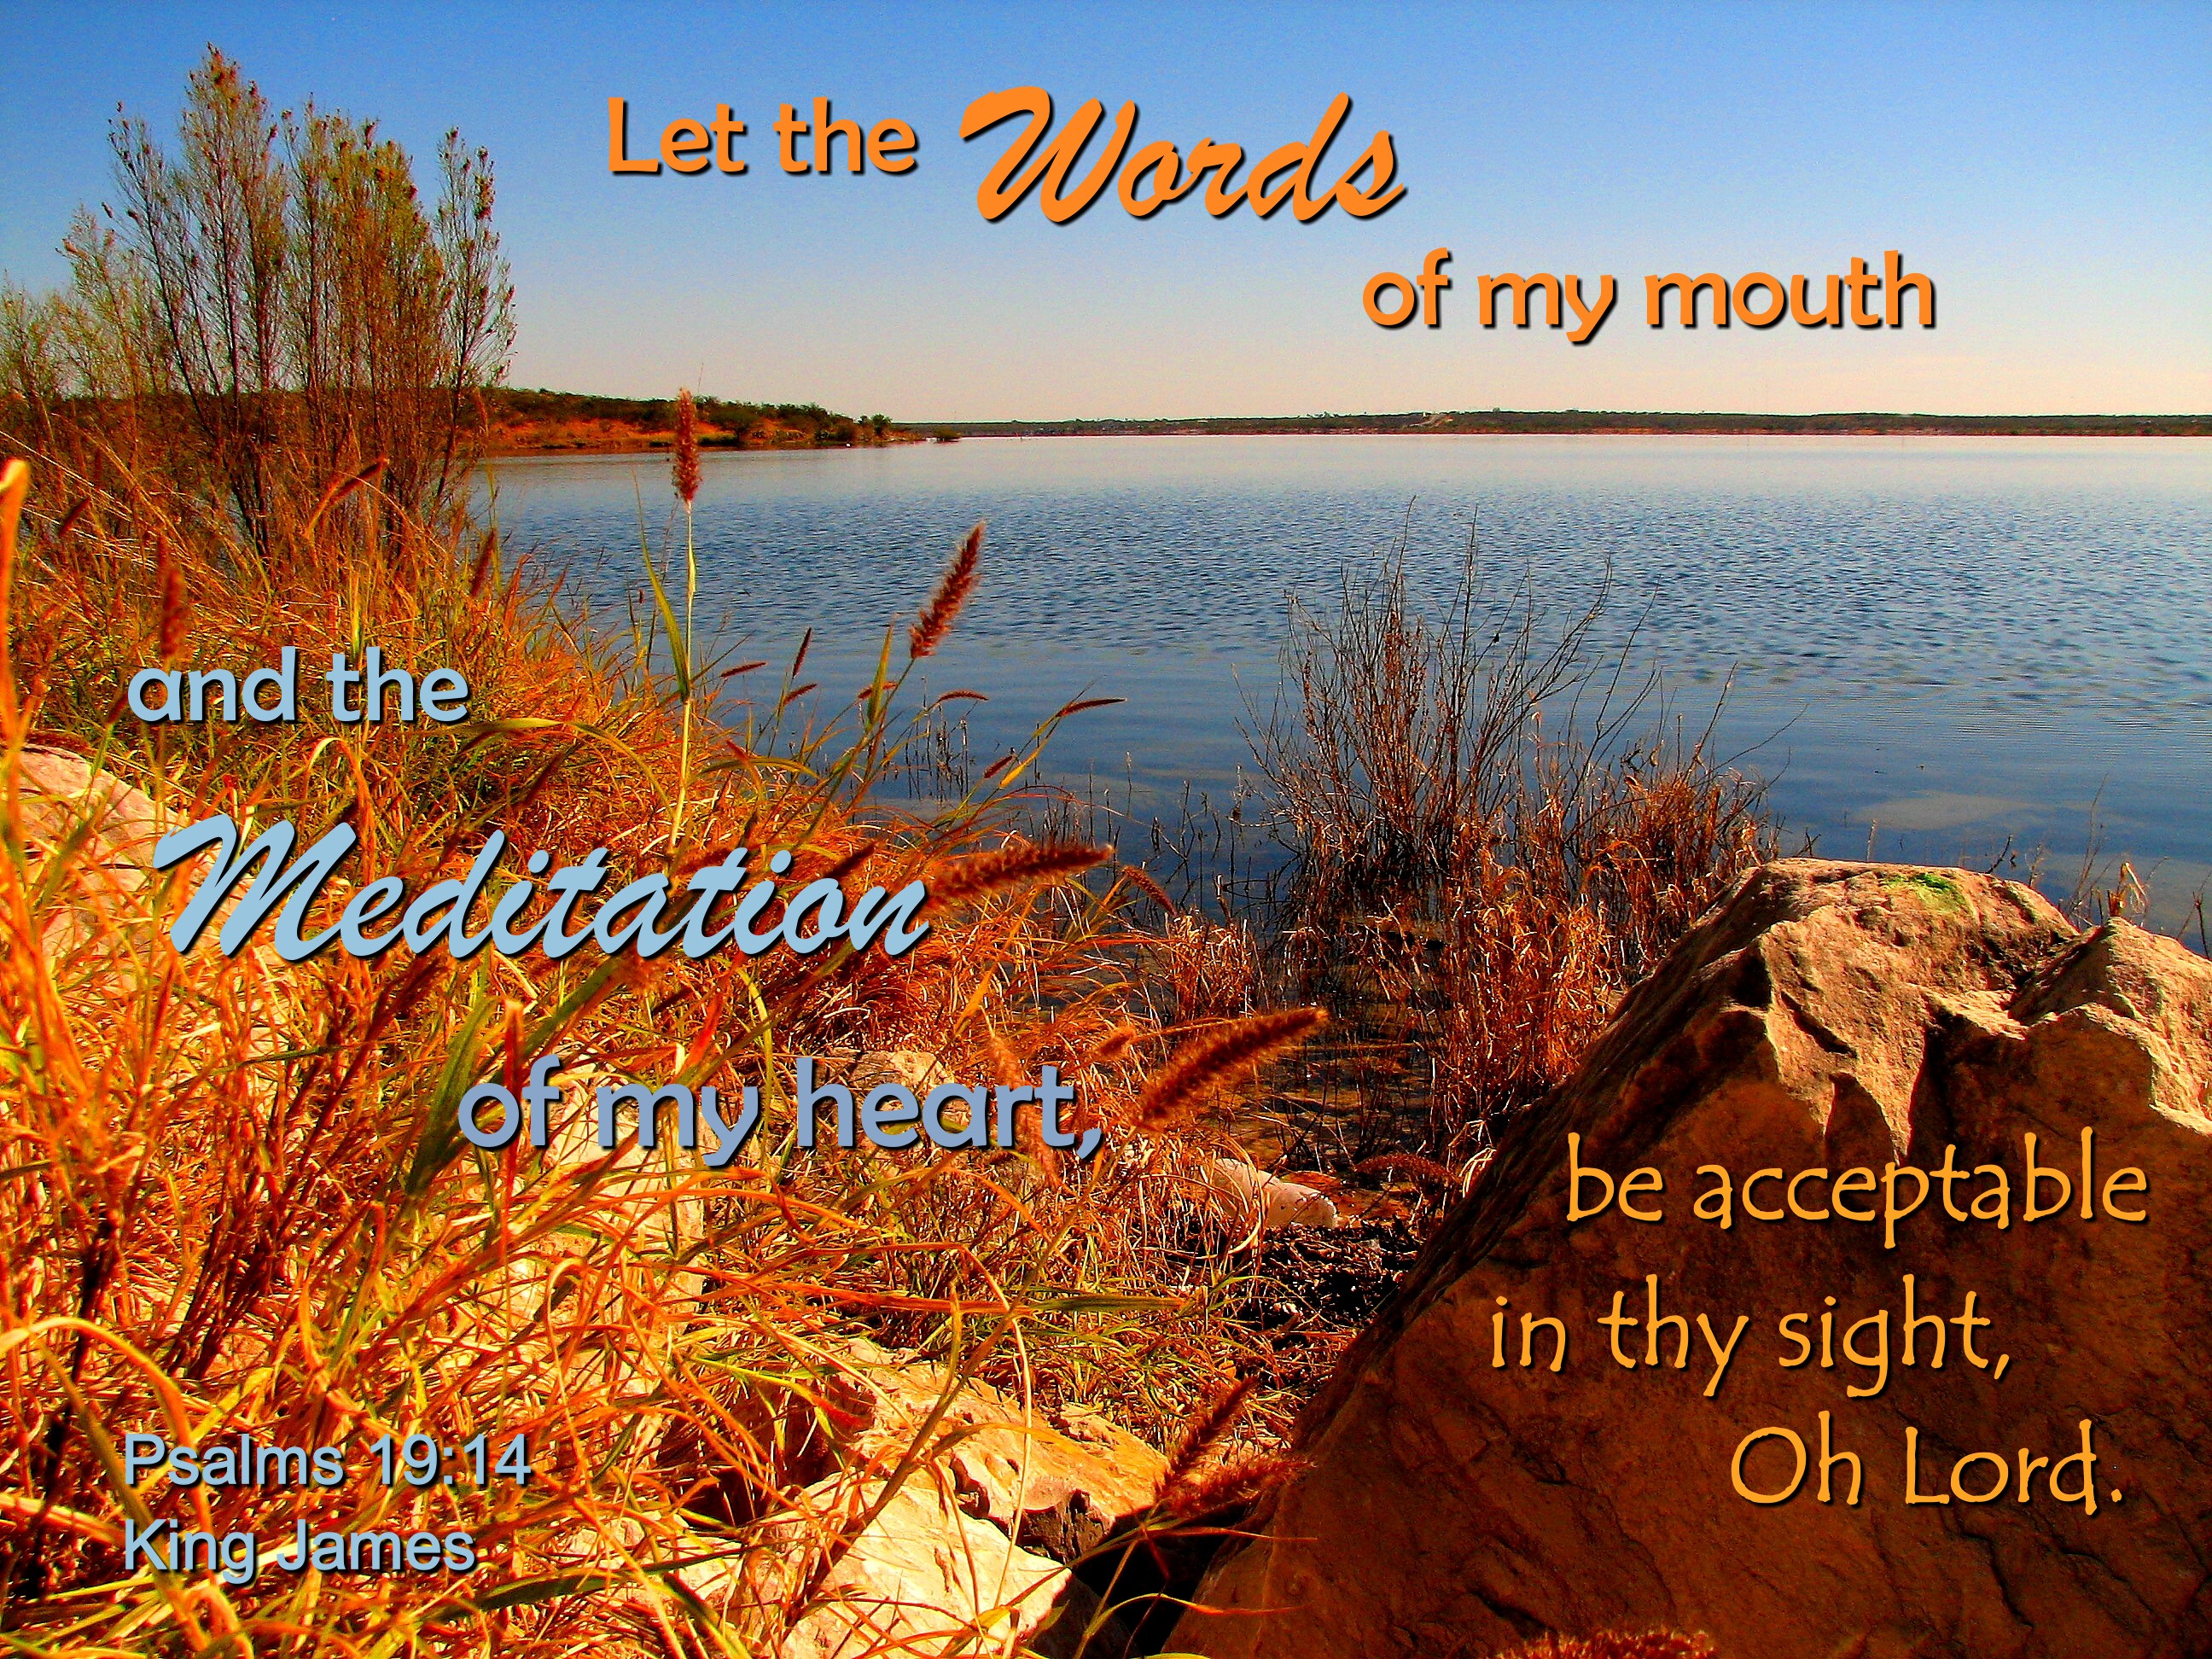 Acceptable words and meditations photo